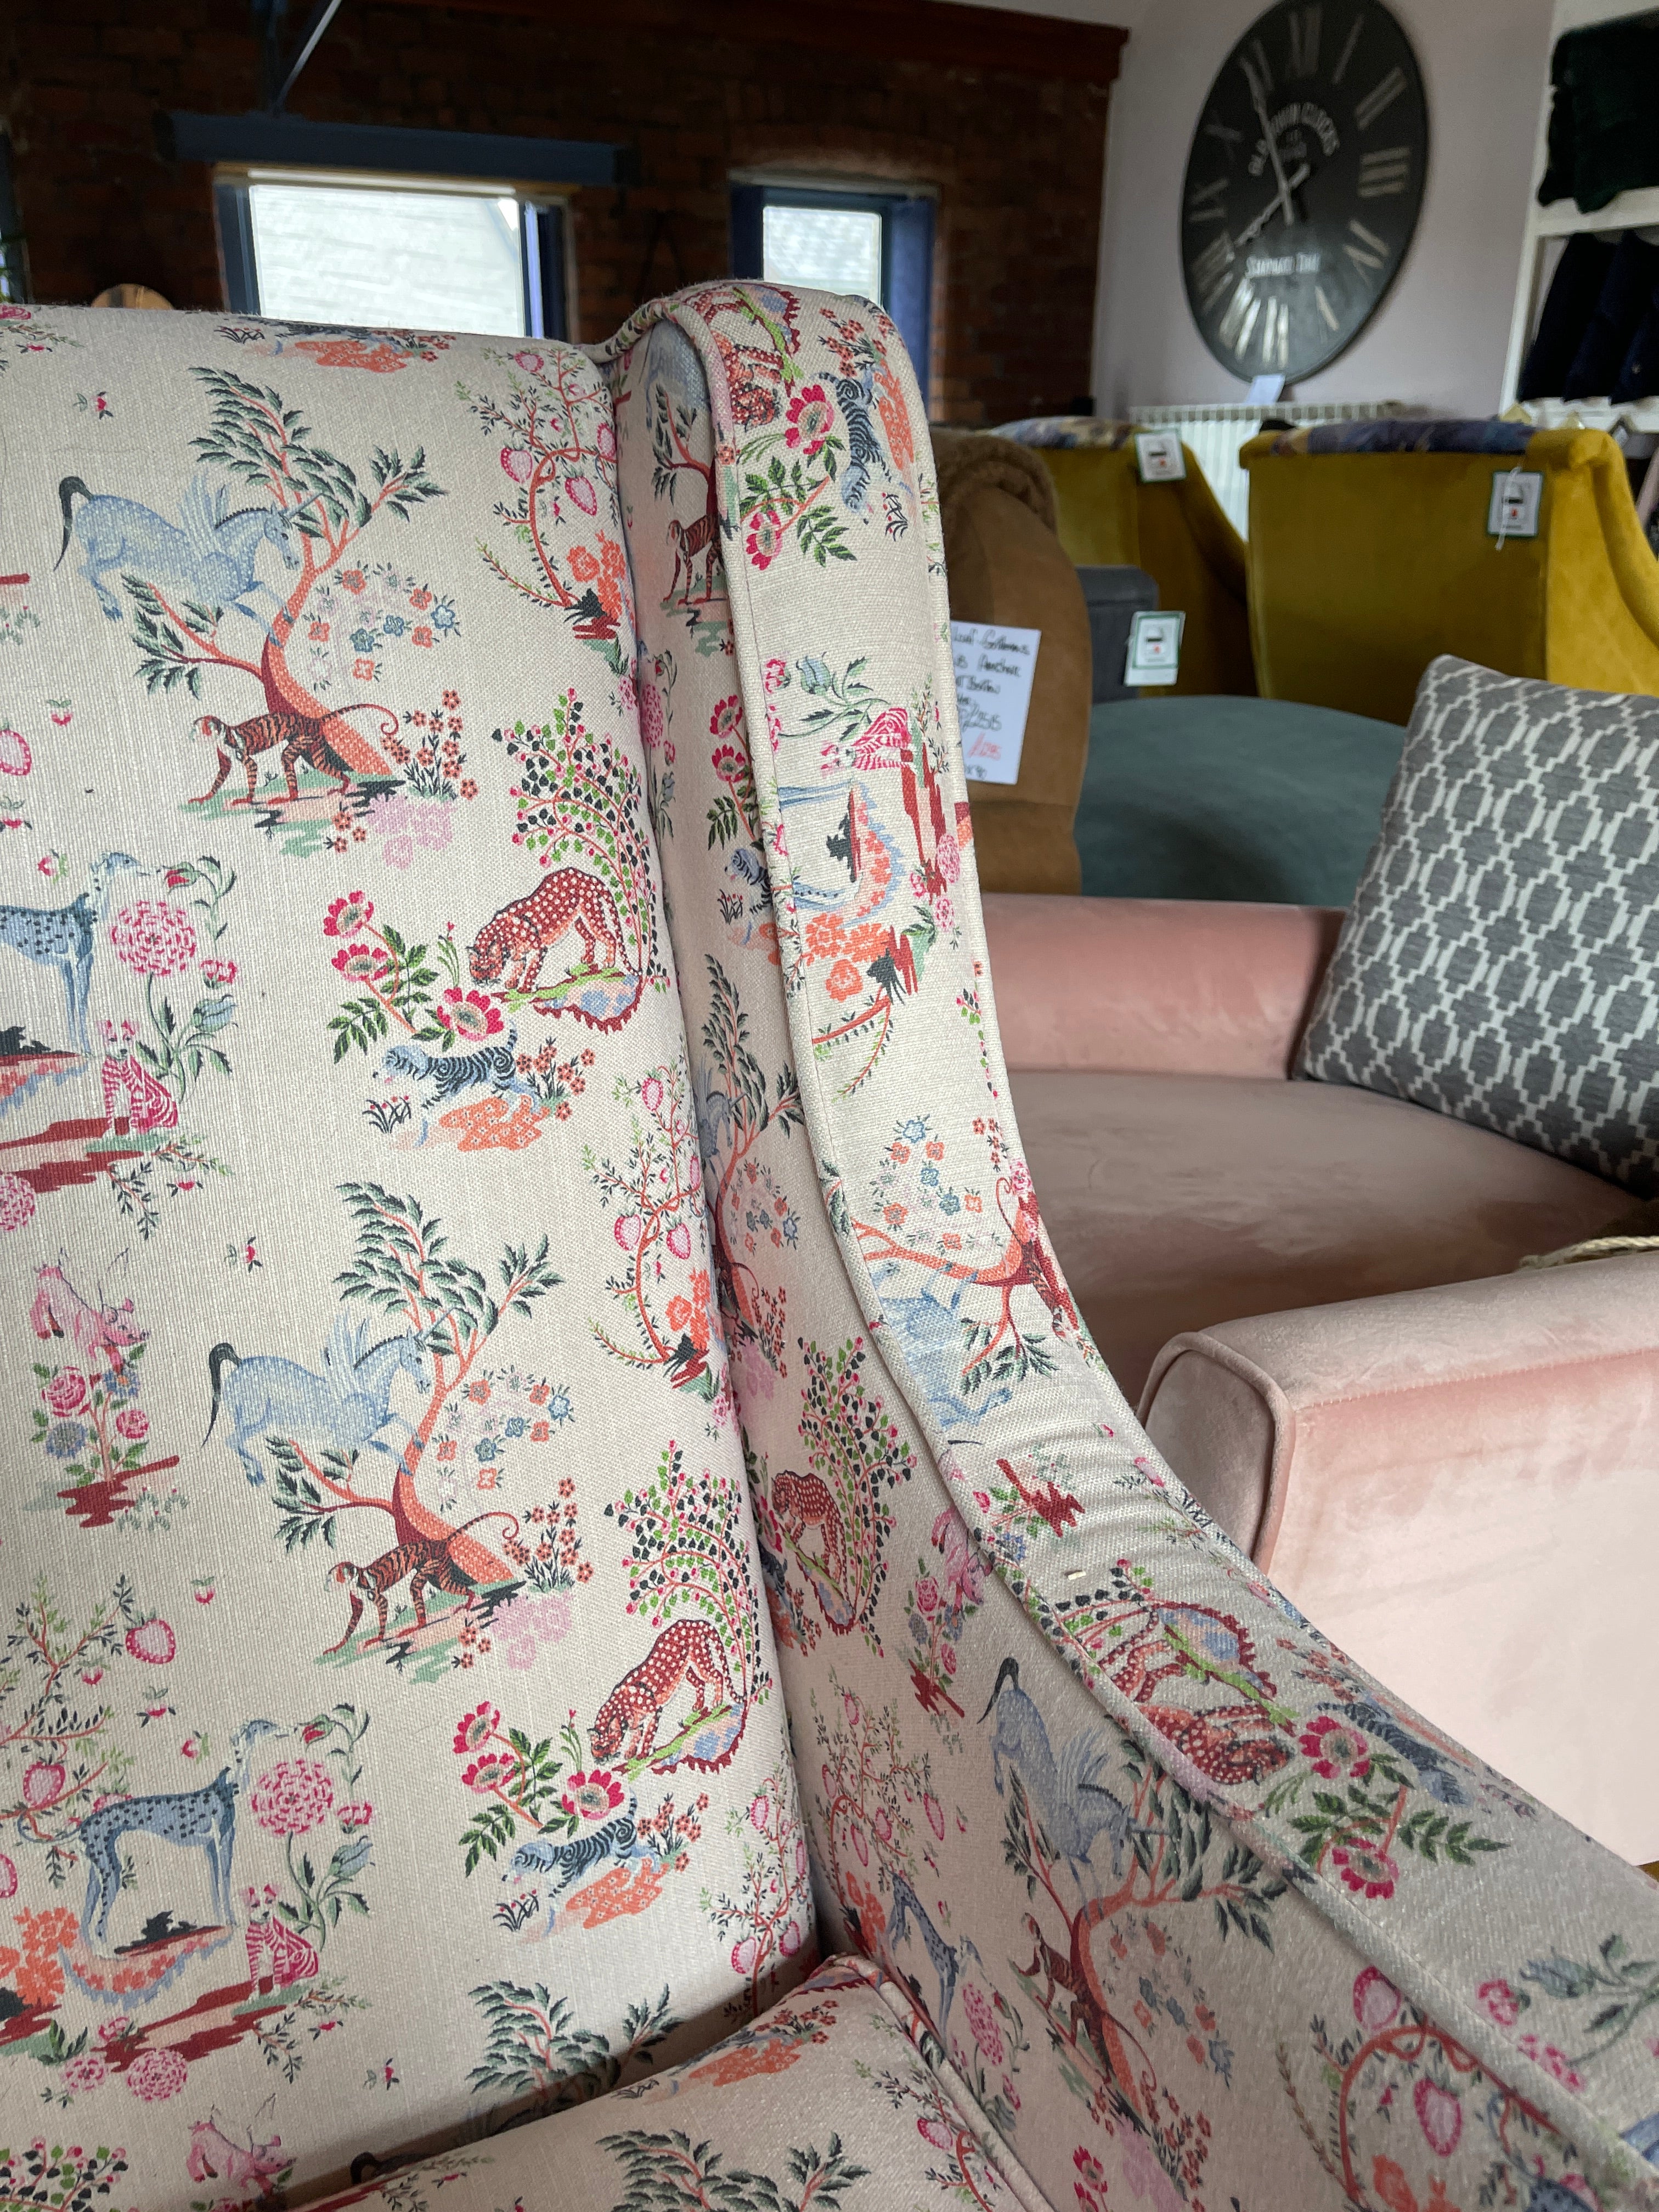 CATH KIDSTON WONDER high back accent chair in Painted Kingdom pink